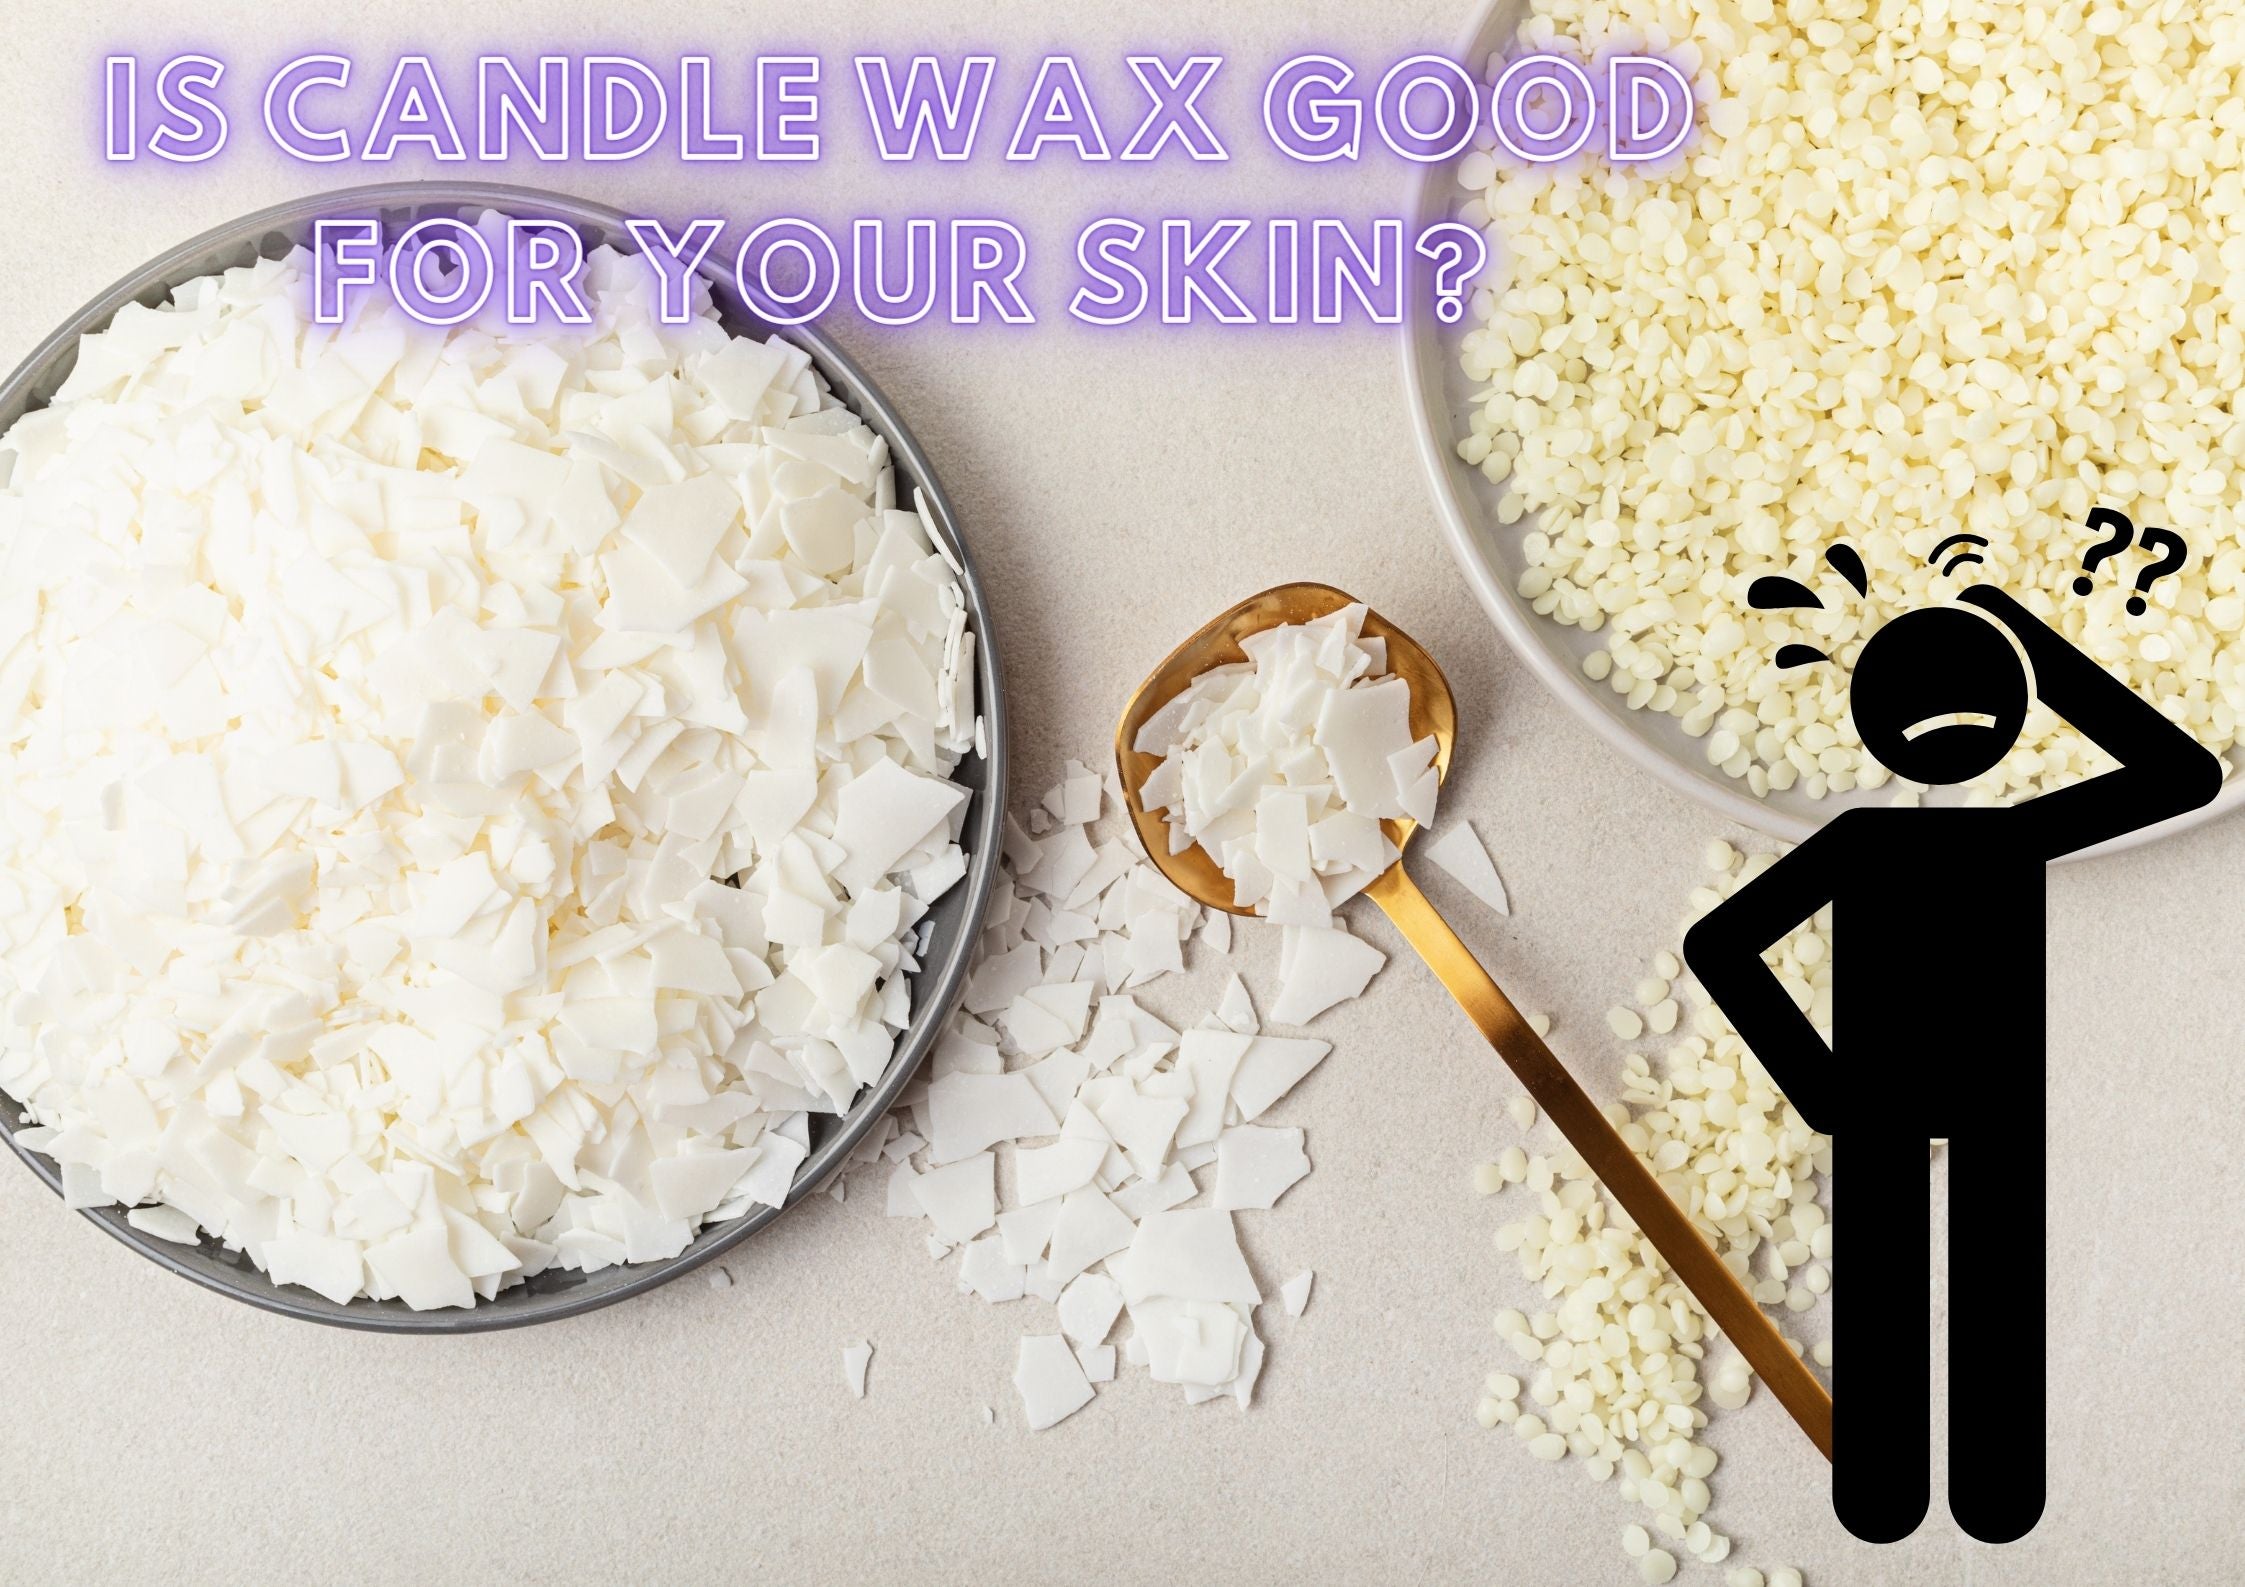 Is candle wax good for your skin?